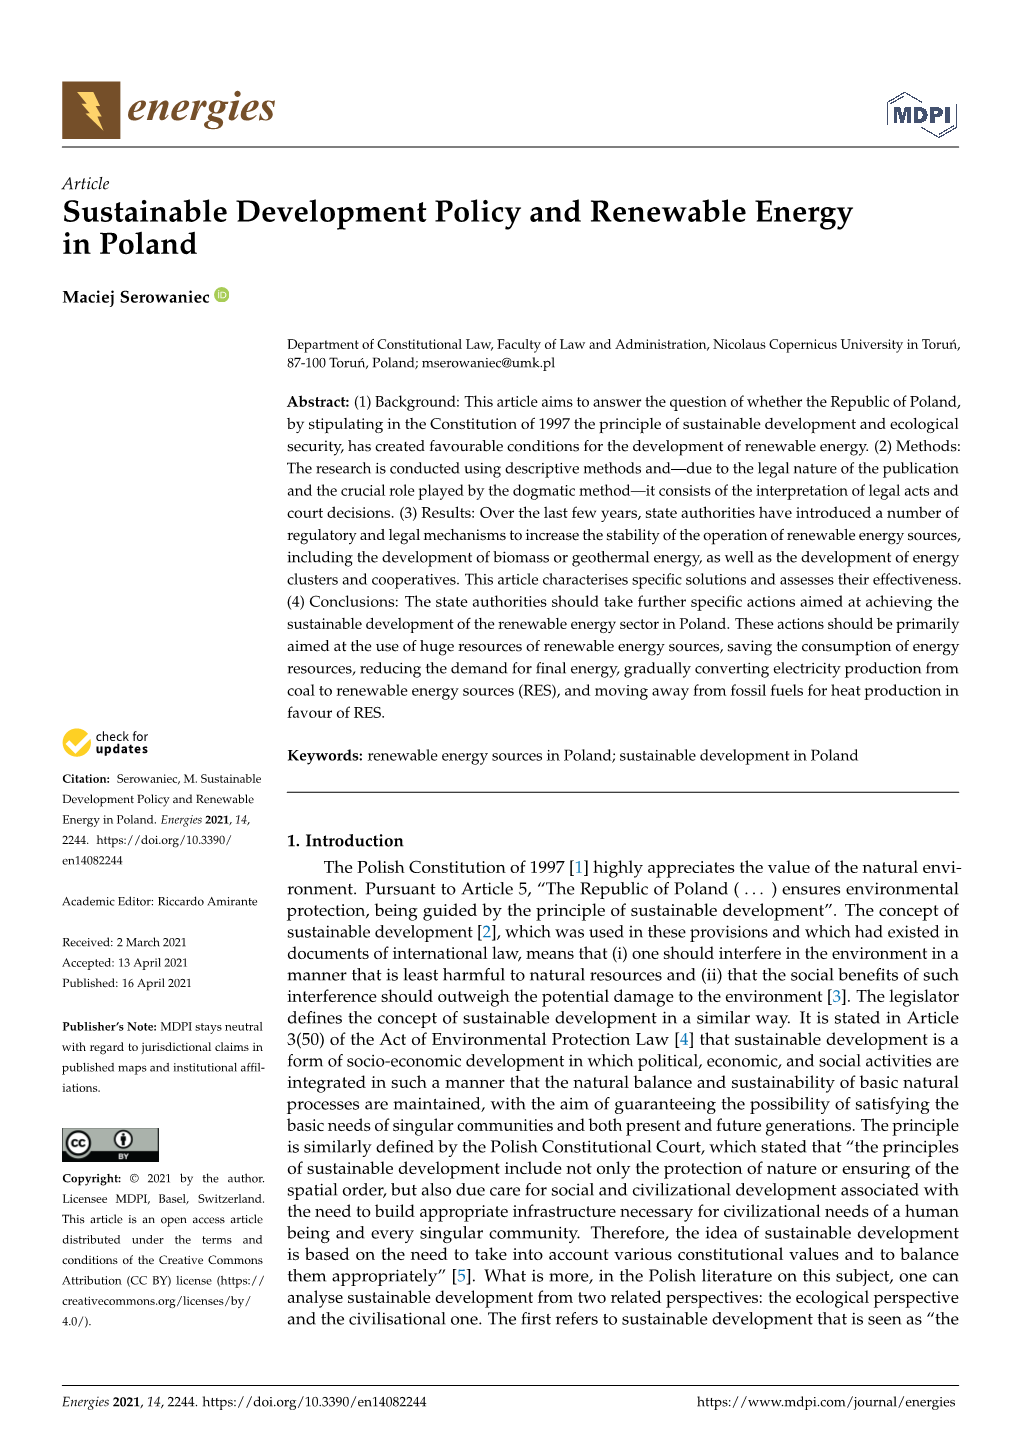 Sustainable Development Policy and Renewable Energy in Poland